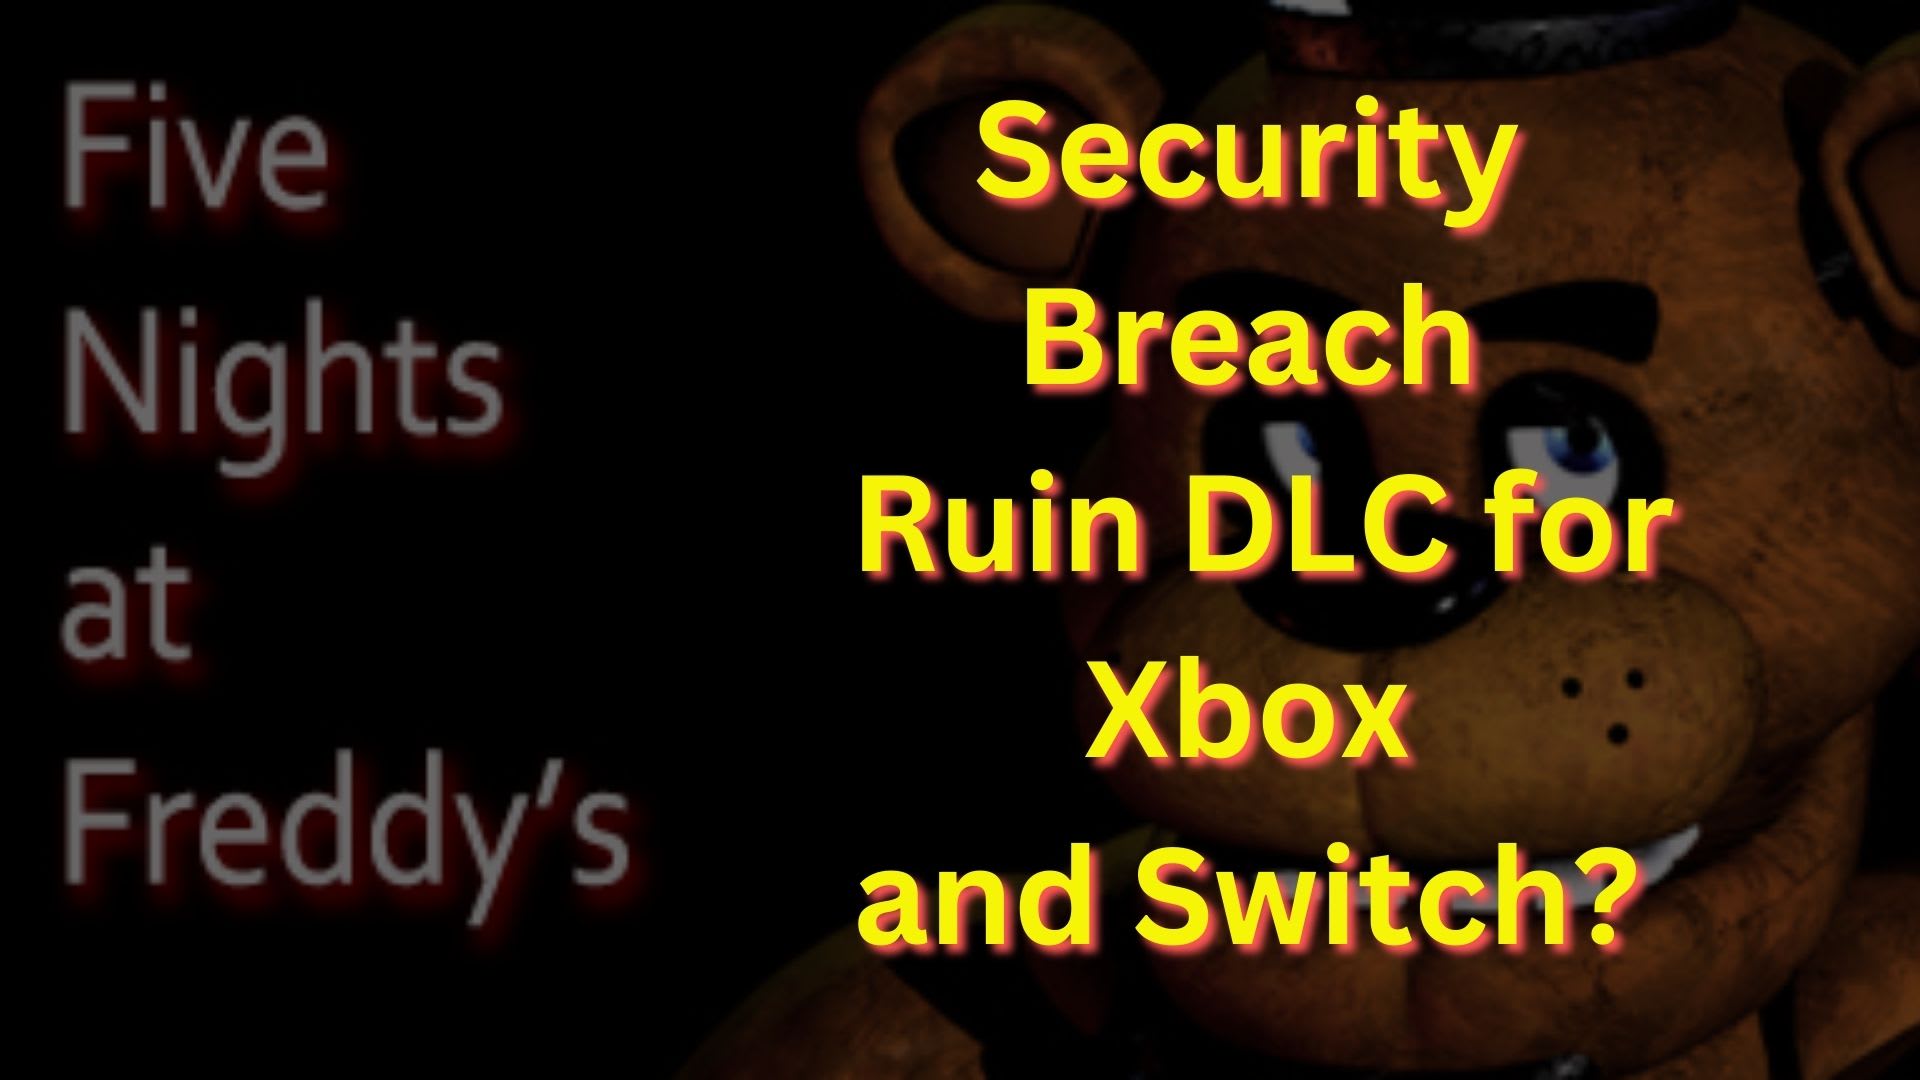 Xbox Series S, Five Nights at Freddy's security breach